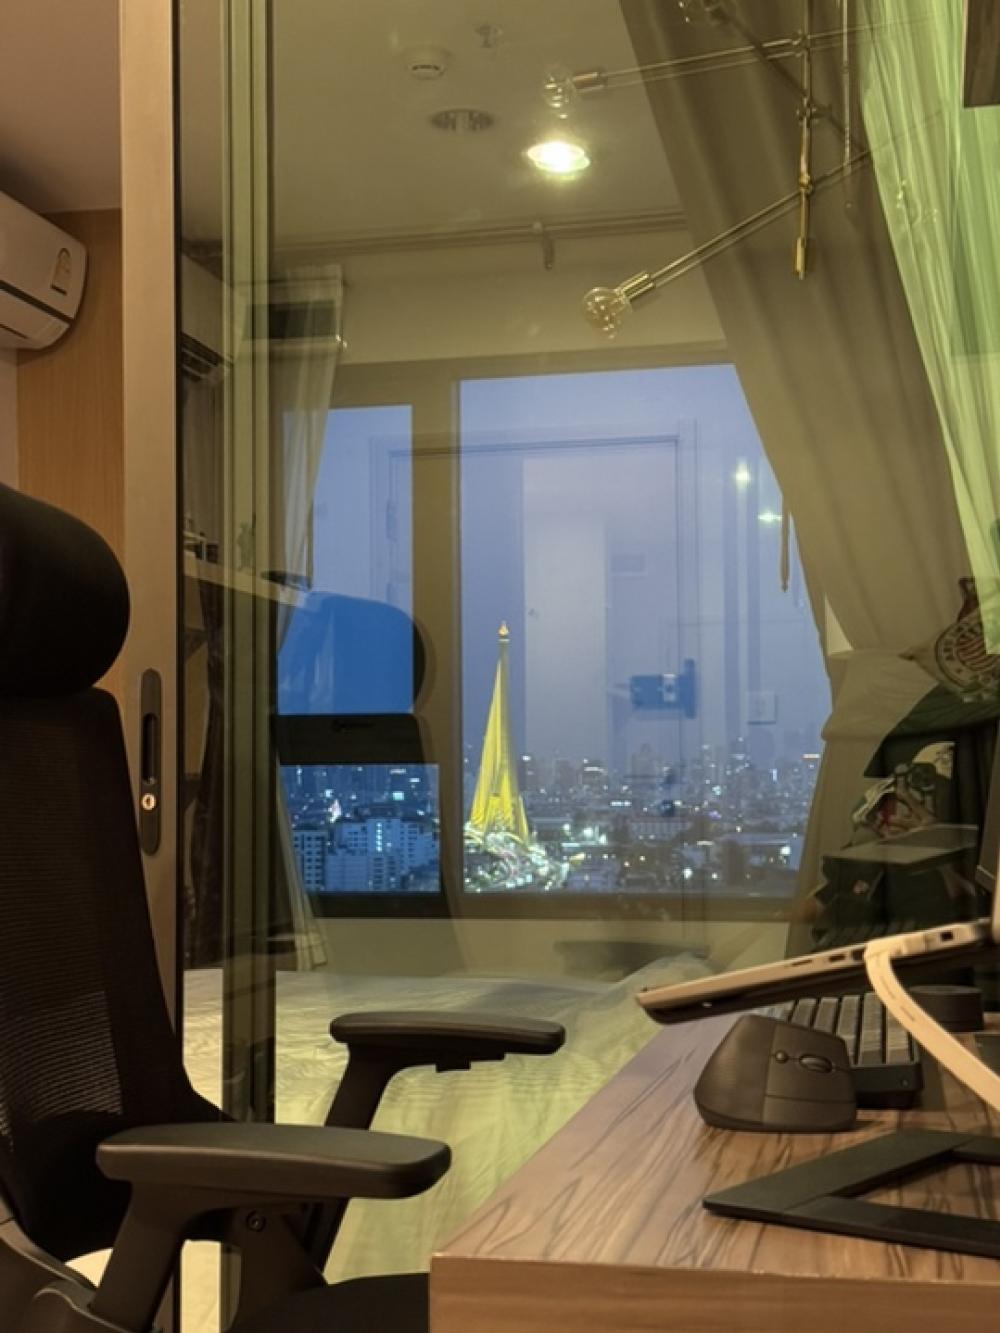 For SaleCondoPinklao, Charansanitwong : Selling!!! Life Pinklao, located right next to MRT (0 meters), near Siriraj Hospital and Central Pinklao. 1 bedroom (1 bed plus), beautiful room, excellent view overlooking Rama VIII Bridge and panoramic view of Bangkok!